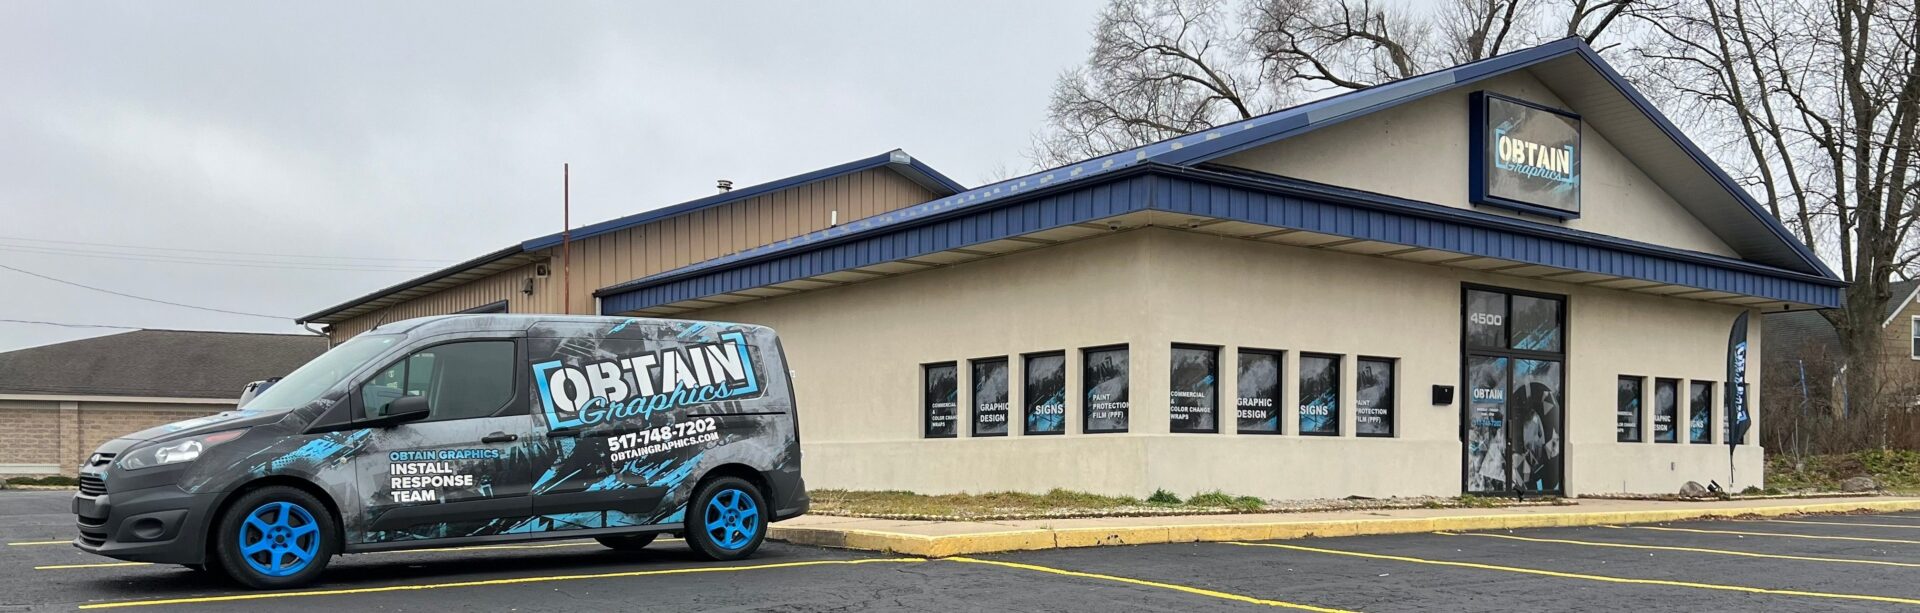 A van parked in front of a building with blue windows.